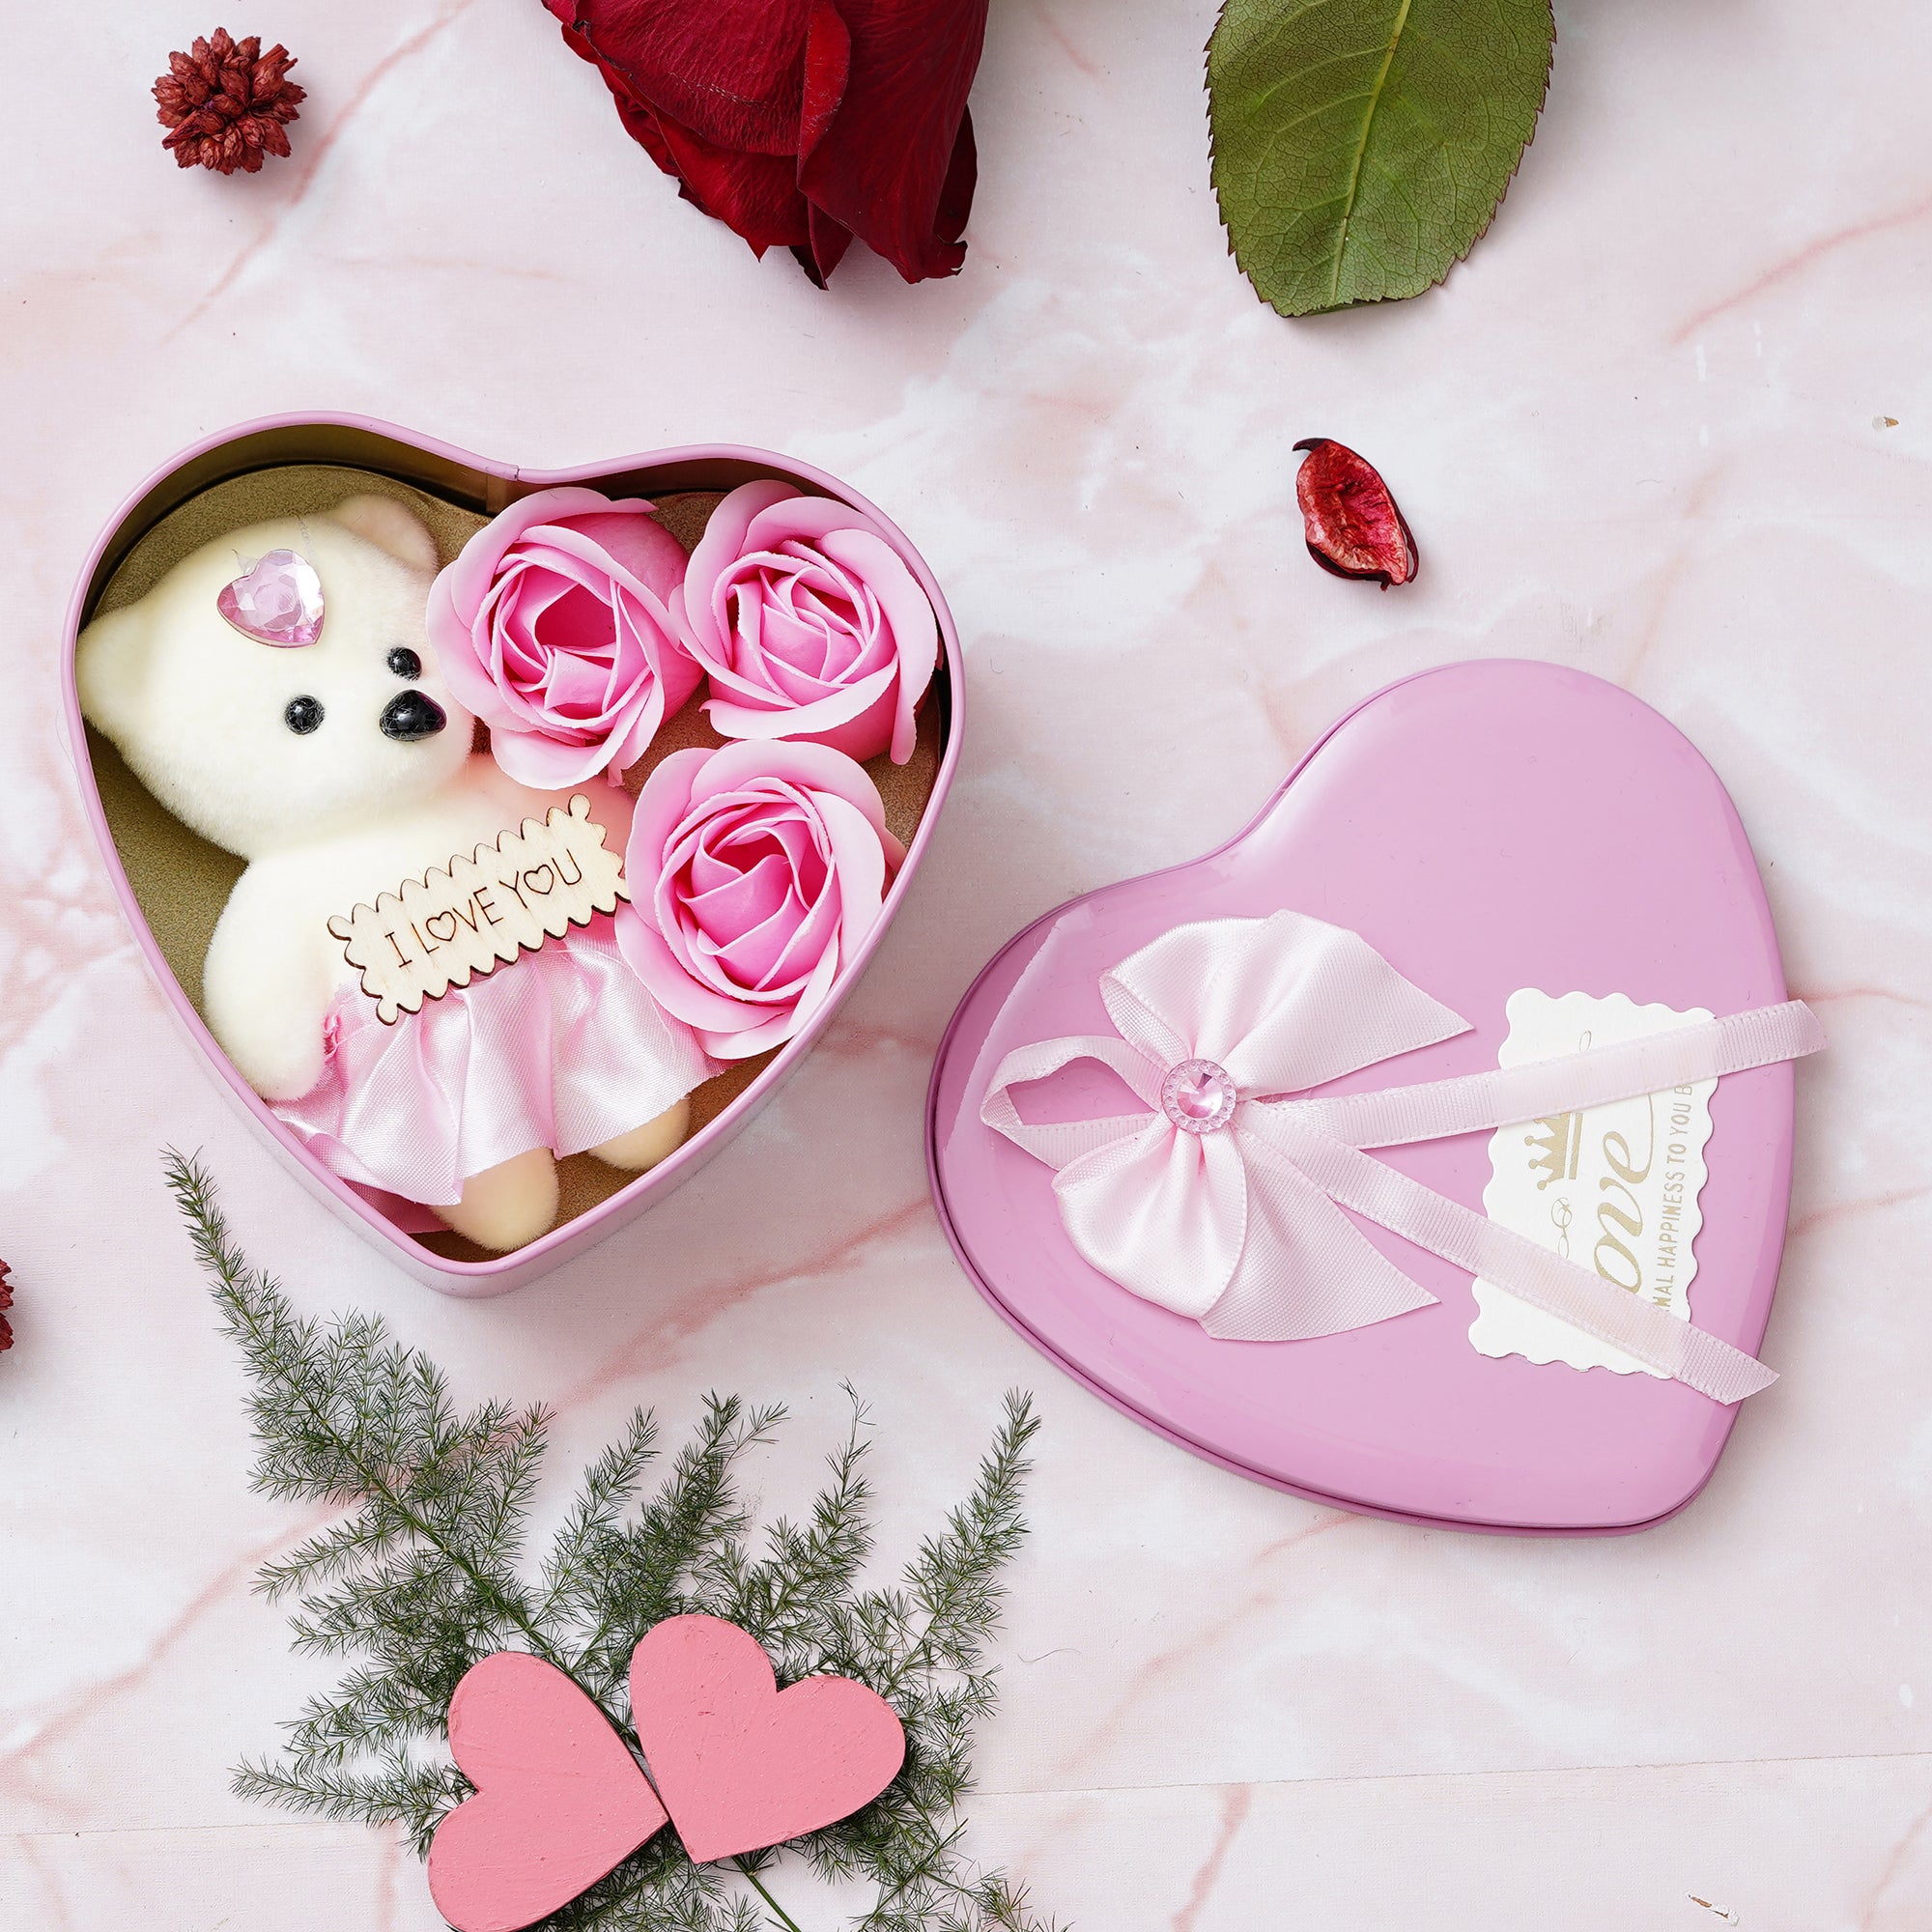 Valentine Combo of Pack of 8 Love Gift Cards, "Love You" Wooden Showpiece With Stand, Pink Heart Shaped Gift Box with Teddy and Roses 5